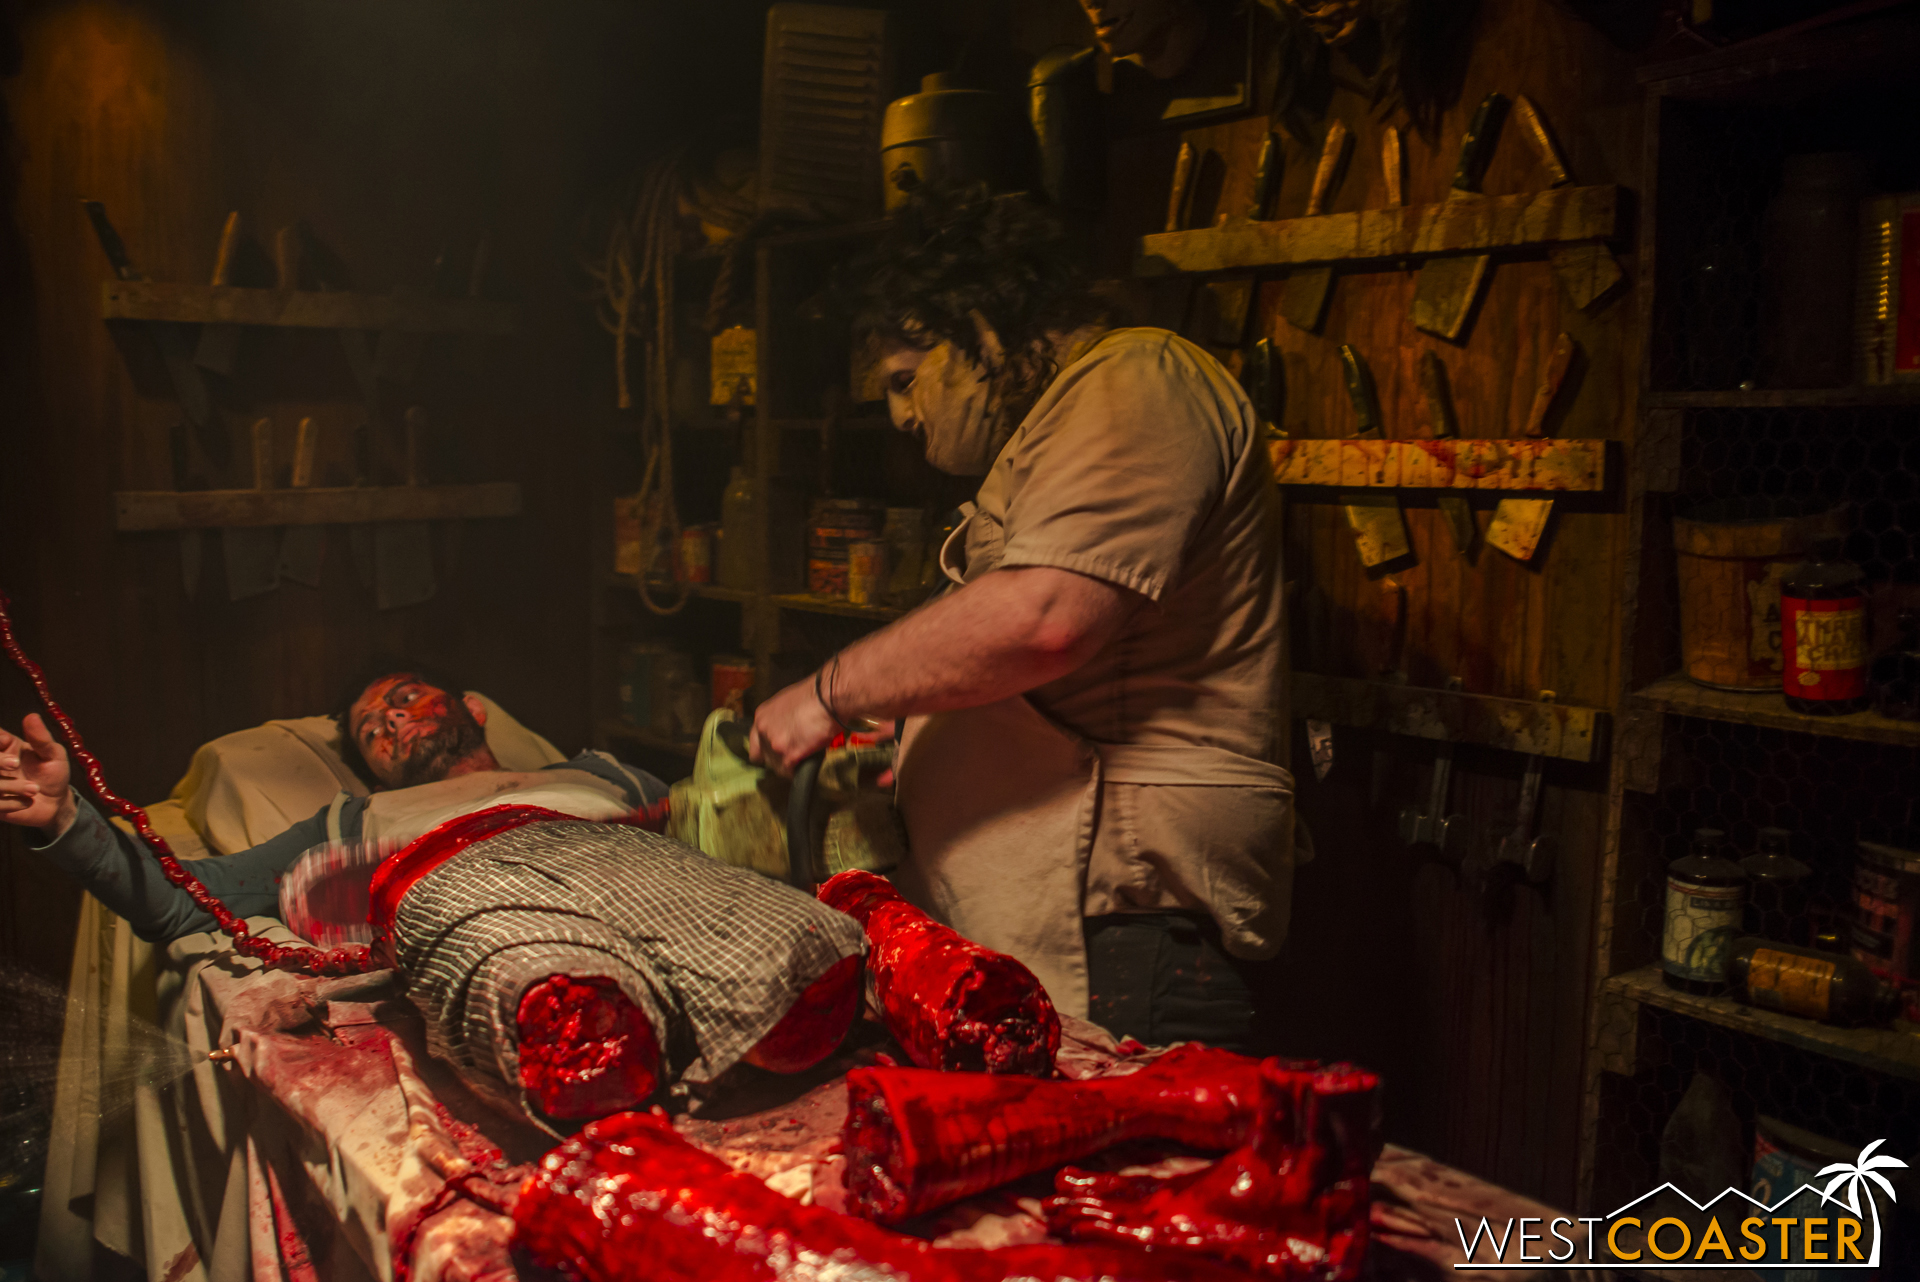  Inside the haunted house, Leatherface is working on arts and crafts. 